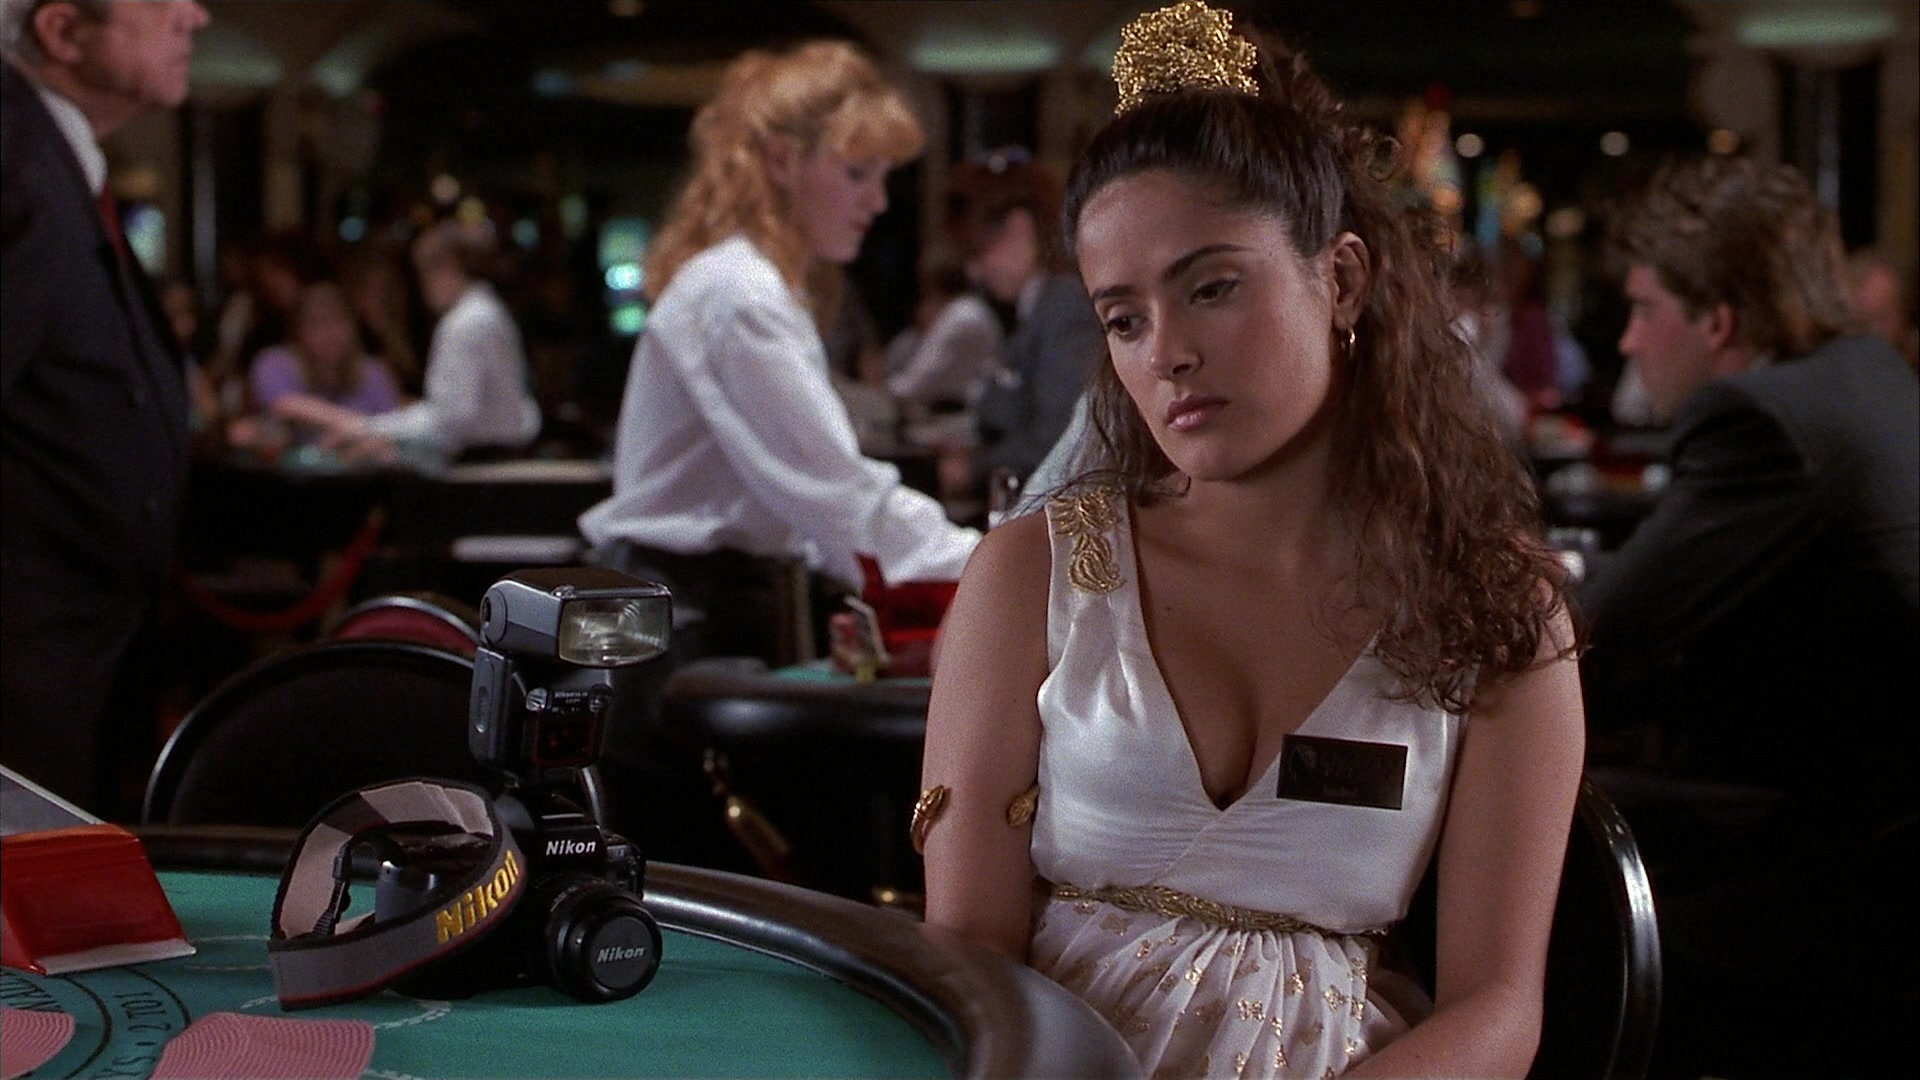 Fools Rush In (Movie): Salma Hayek As Isabel Fuentes-Whitman, A Mexican and American actress and producer. 1920x1080 Full HD Background.